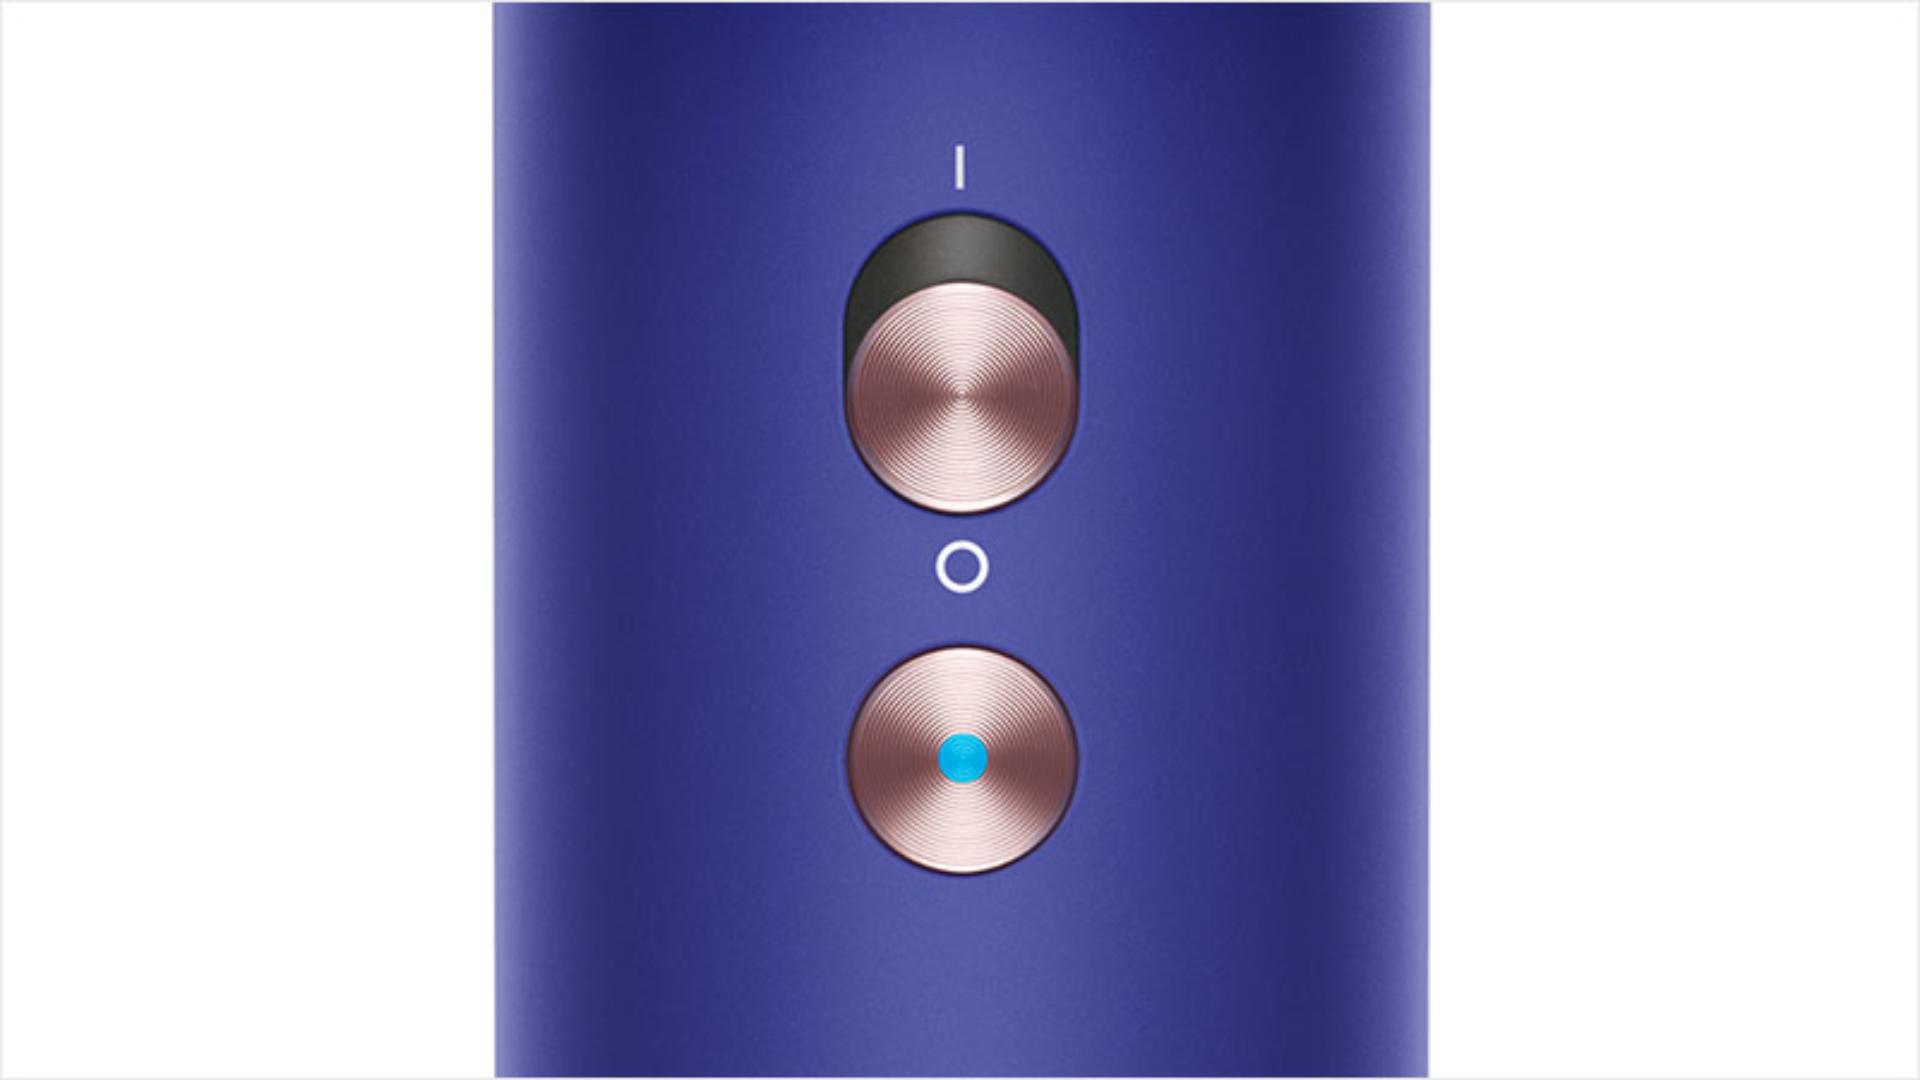 Close-up of the Cold shot button on the Dyson Supersonic.